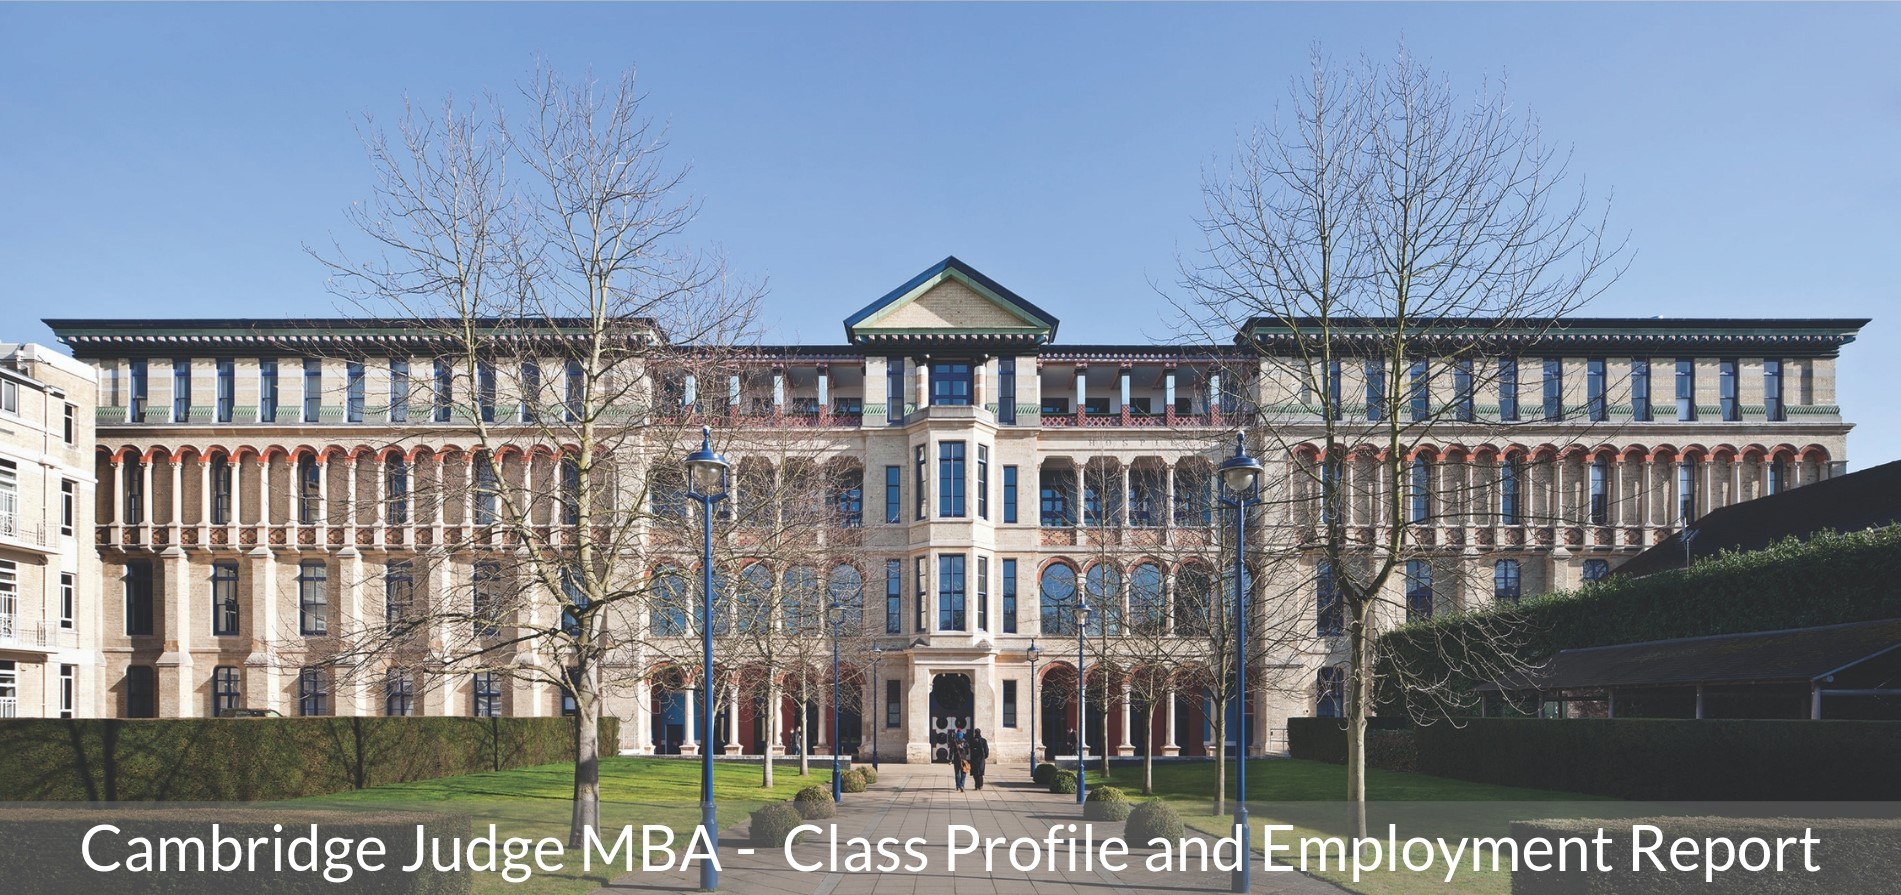 Cambridge Judge Business School MBA Program - Class Profile, Career and Employment Outcomes